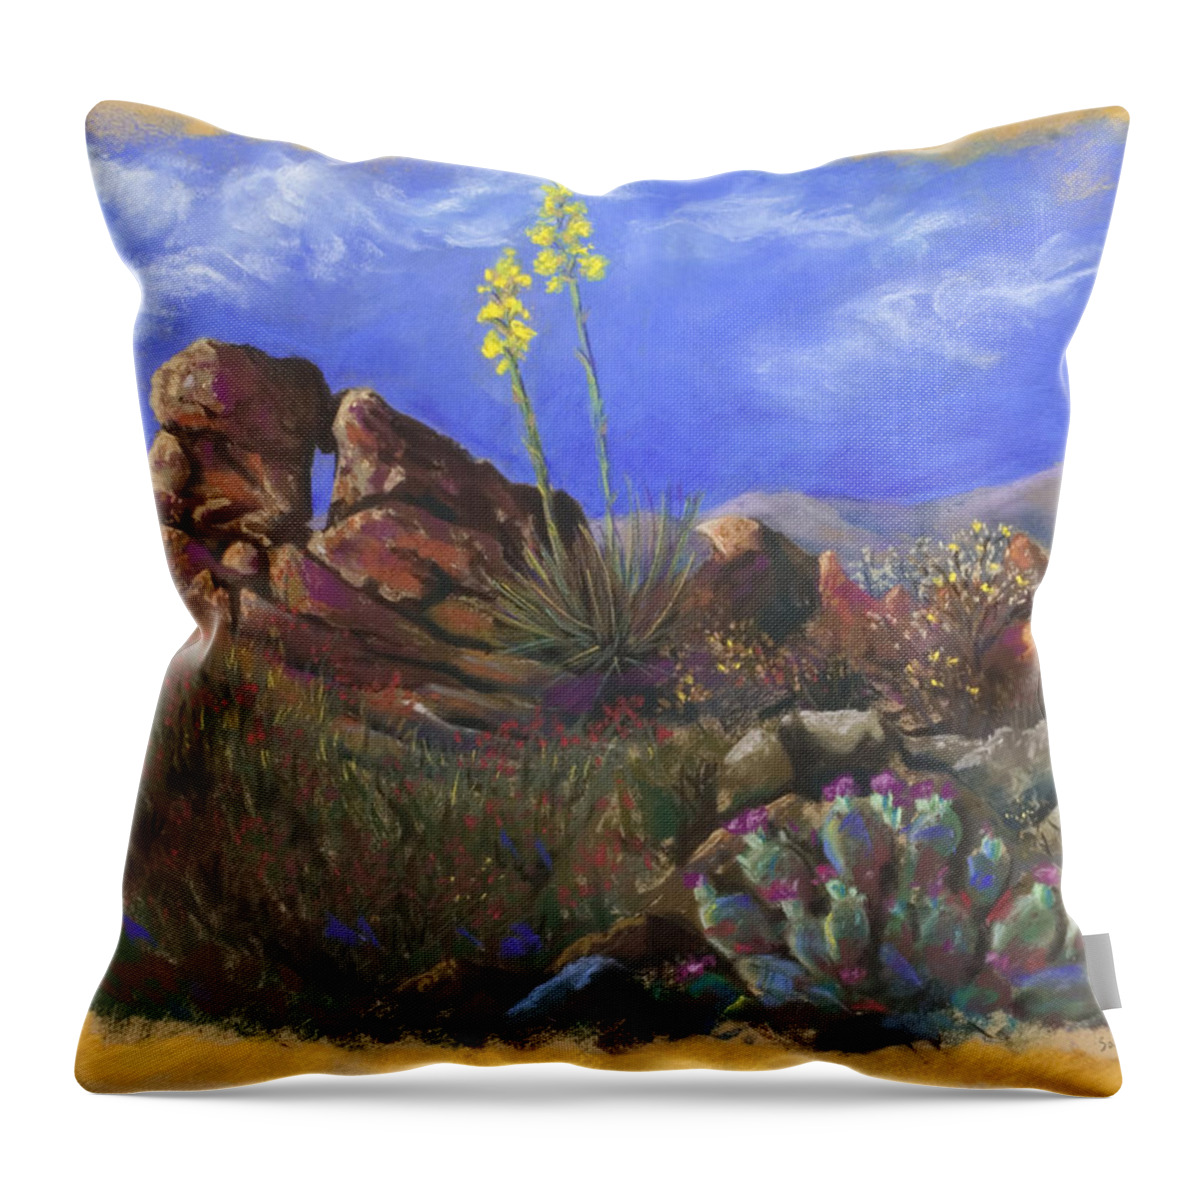 Landscape Desert Cactus California Anza Borrego Rocks Prickly Pear Yucca Purple Red Gold Blue Chaparral Mountains Majestic Throw Pillow featuring the pastel Anza Borrego April by Brenda Salamone